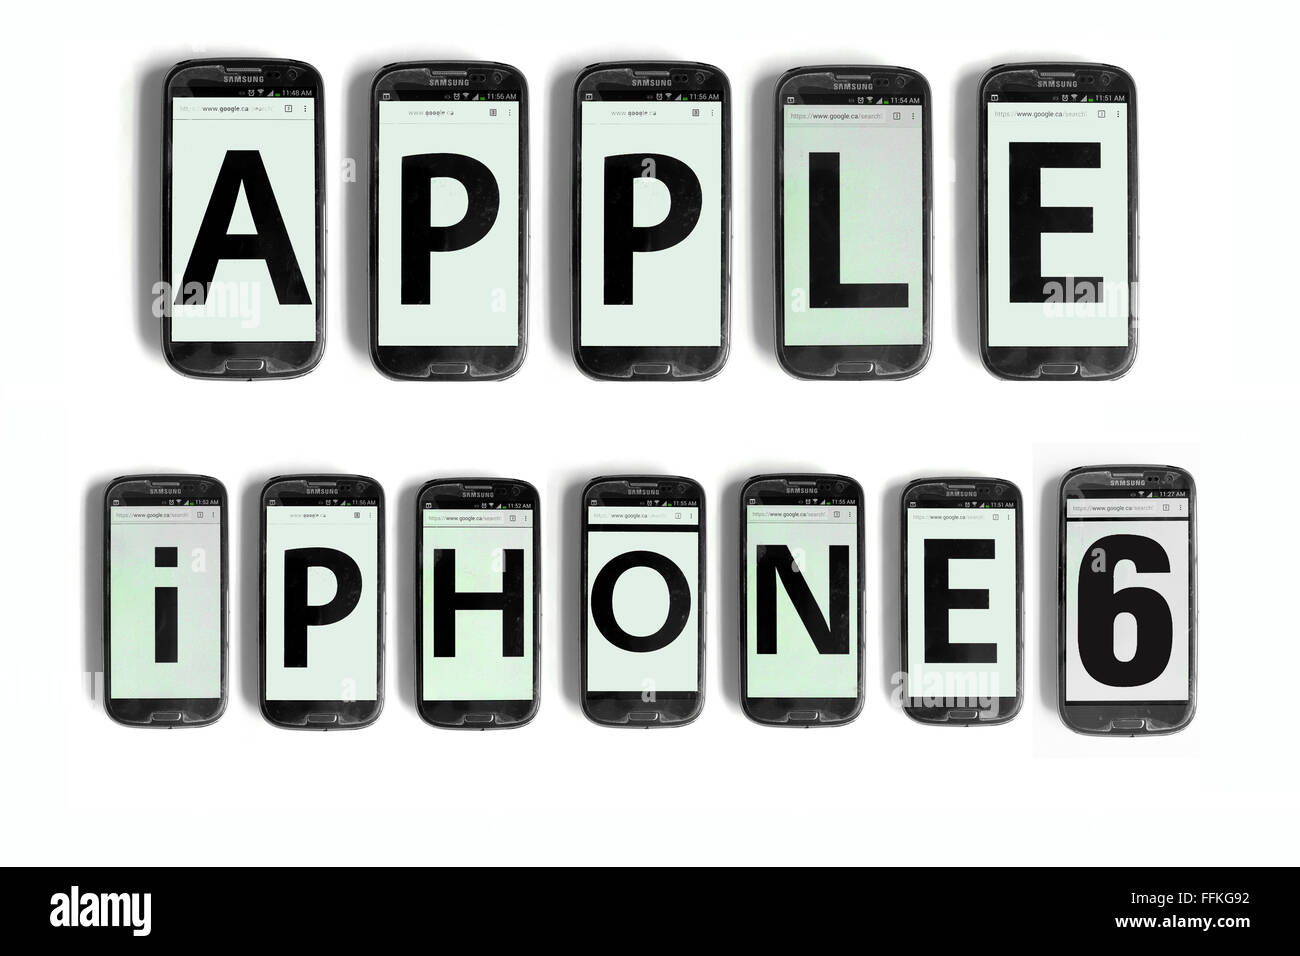 Apple iPhone 6 written on the screens of smartphones photographed against a white background. Stock Photo